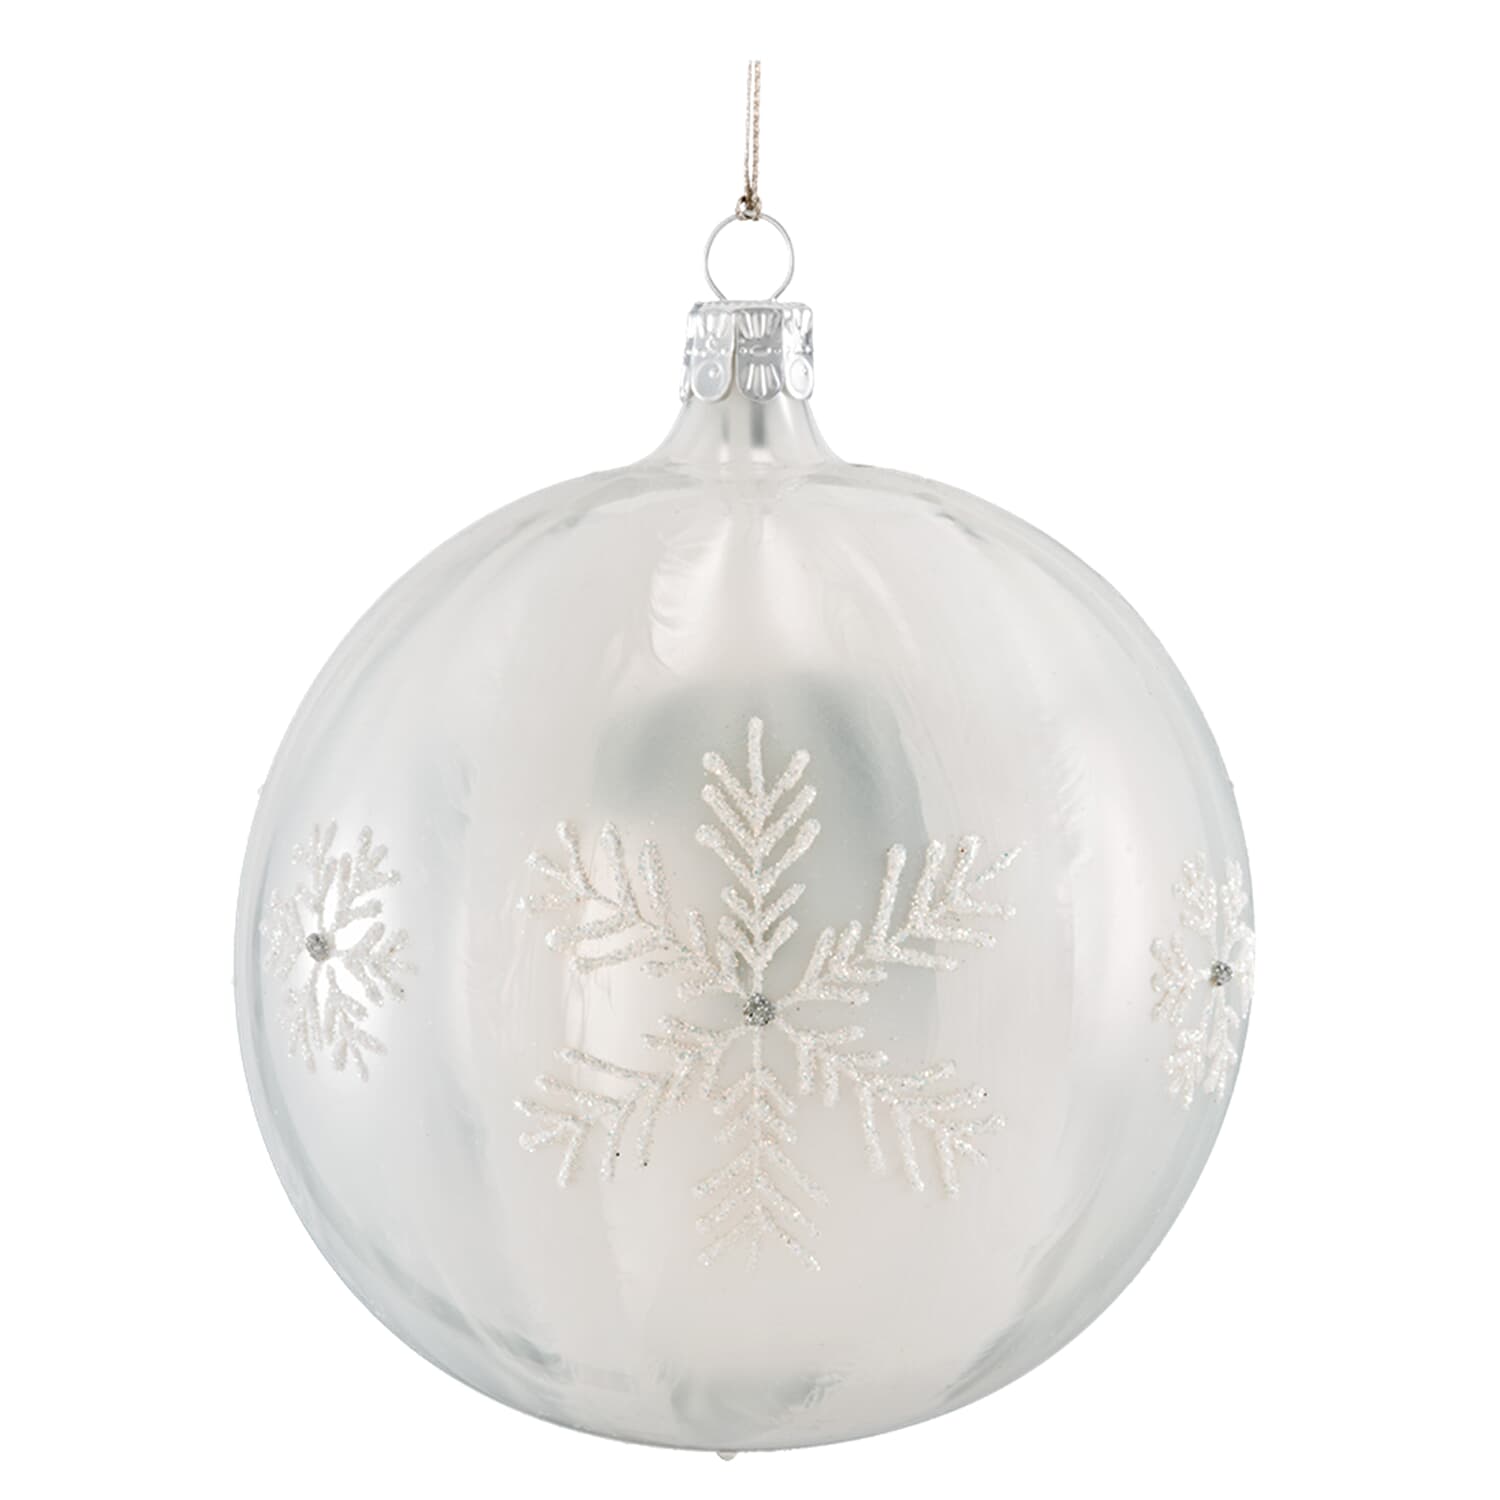 Glass bauble white with snow crystals, 10 cm